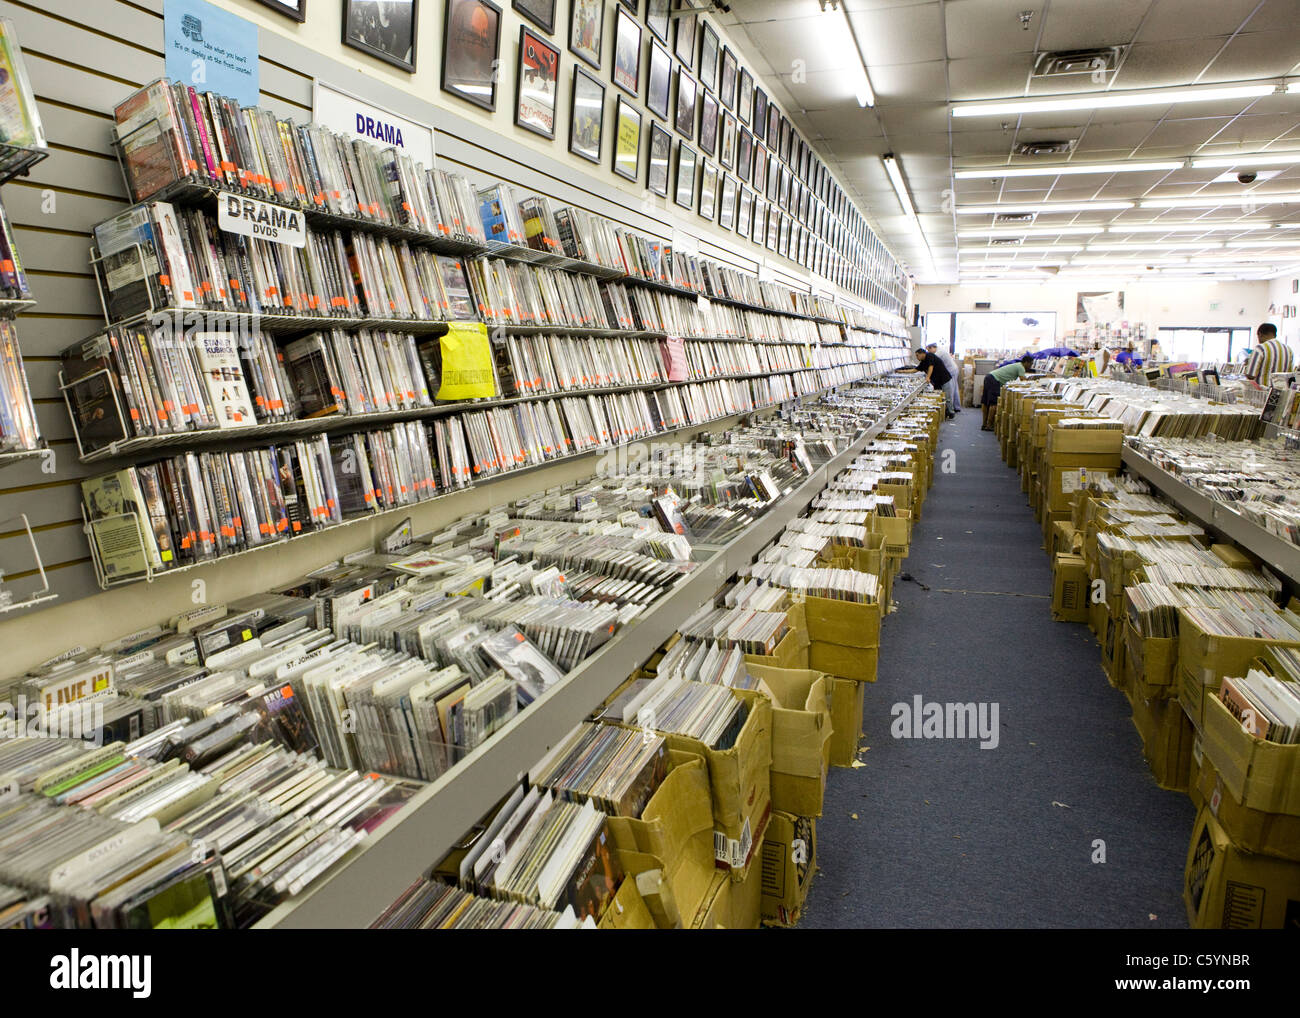 Used DVDs, CDs, and vinyl records line the walls and shelves in a music store Stock Photo